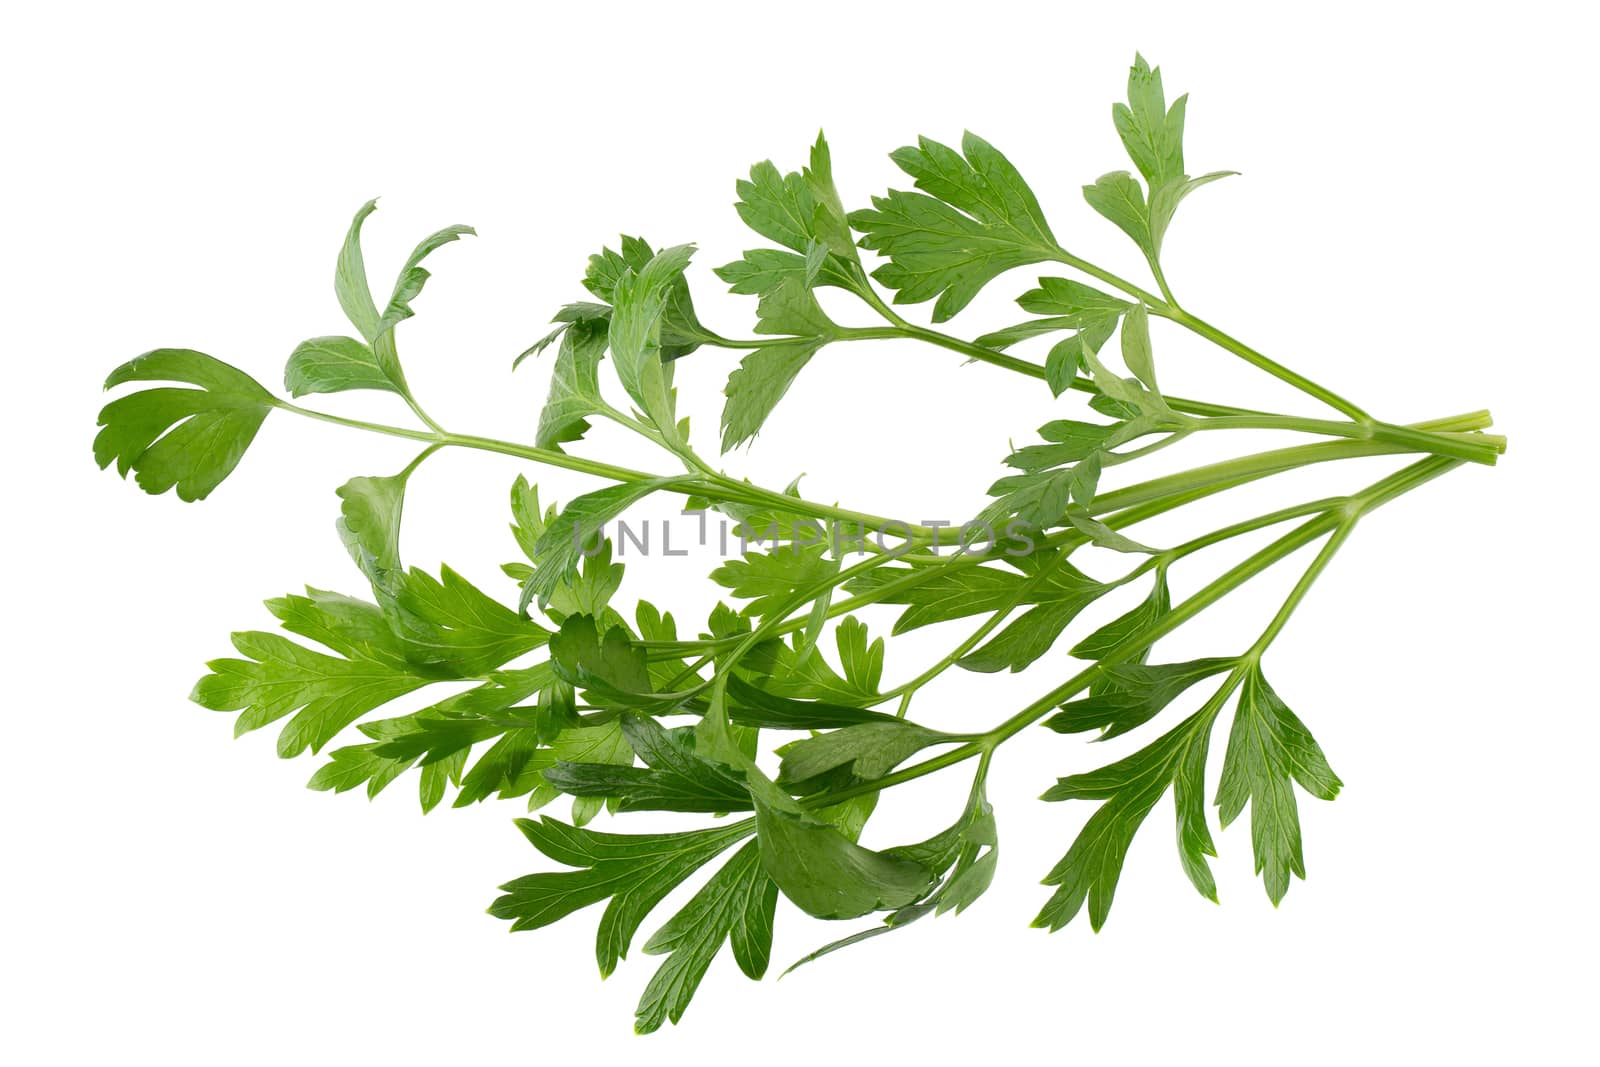 parsley fresh herb isolated on a white background by kaiskynet